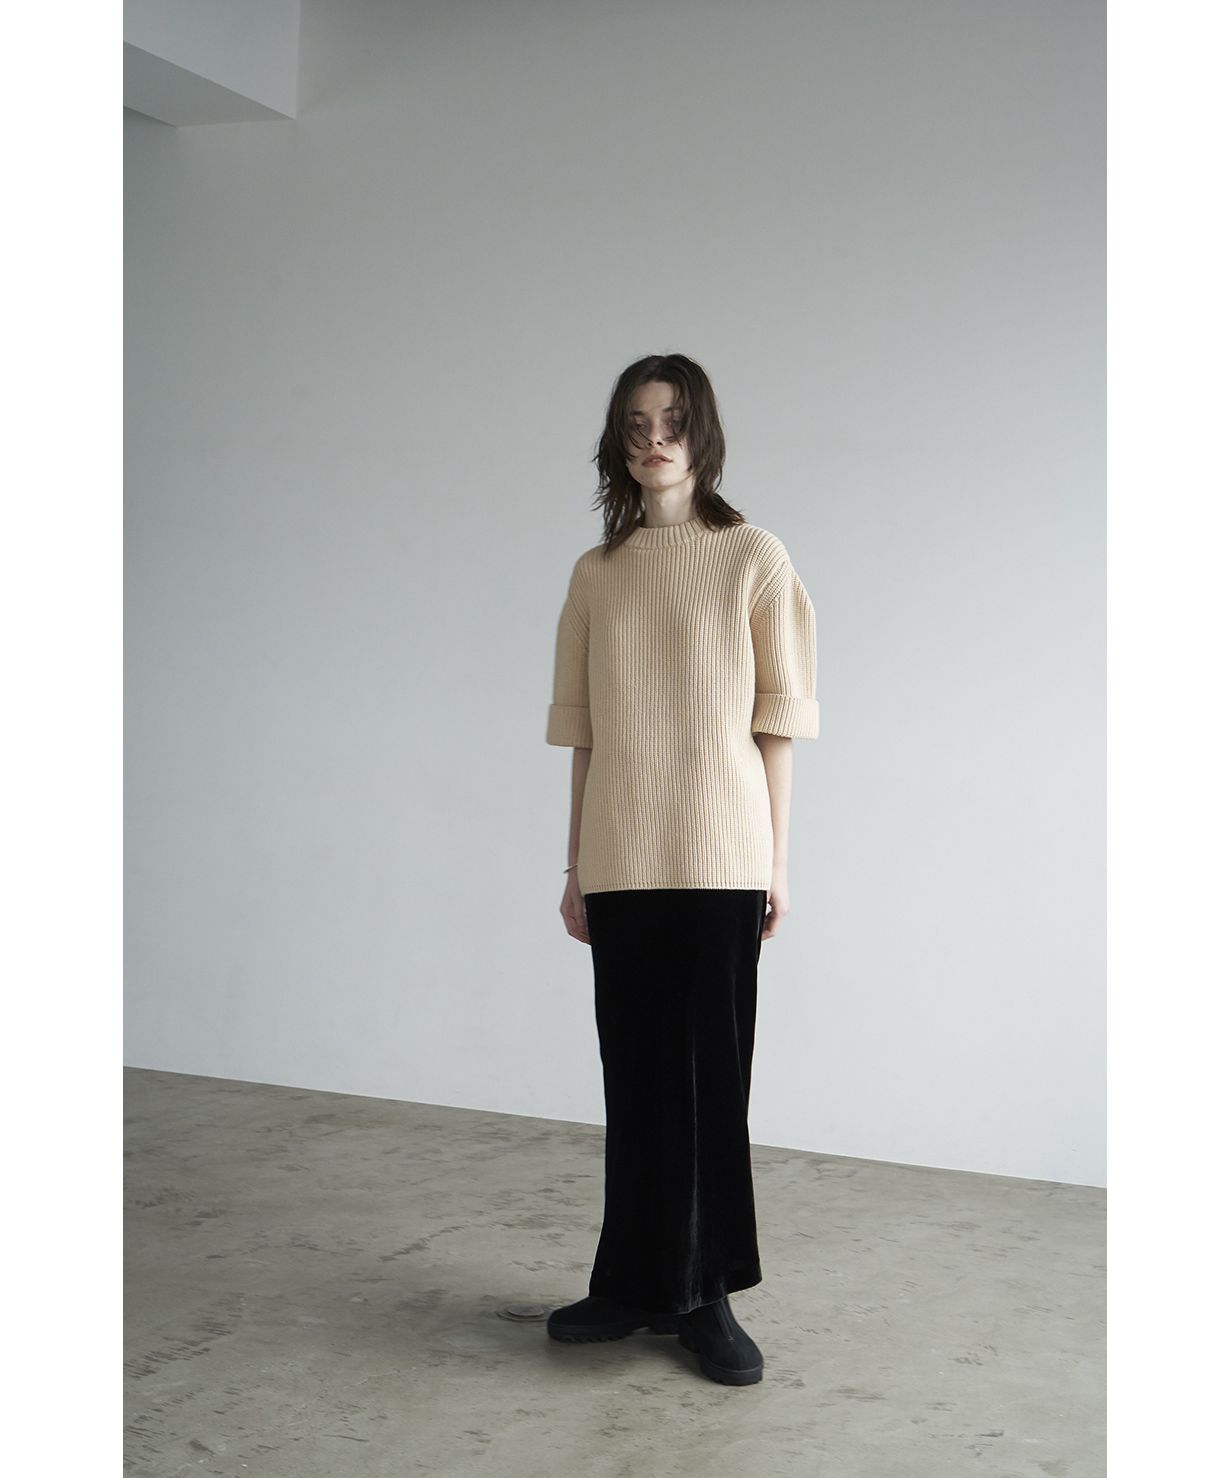 CLANE / OVER HALF SLEEVE KNIT TOPS自宅で1度試着をしました - ニット